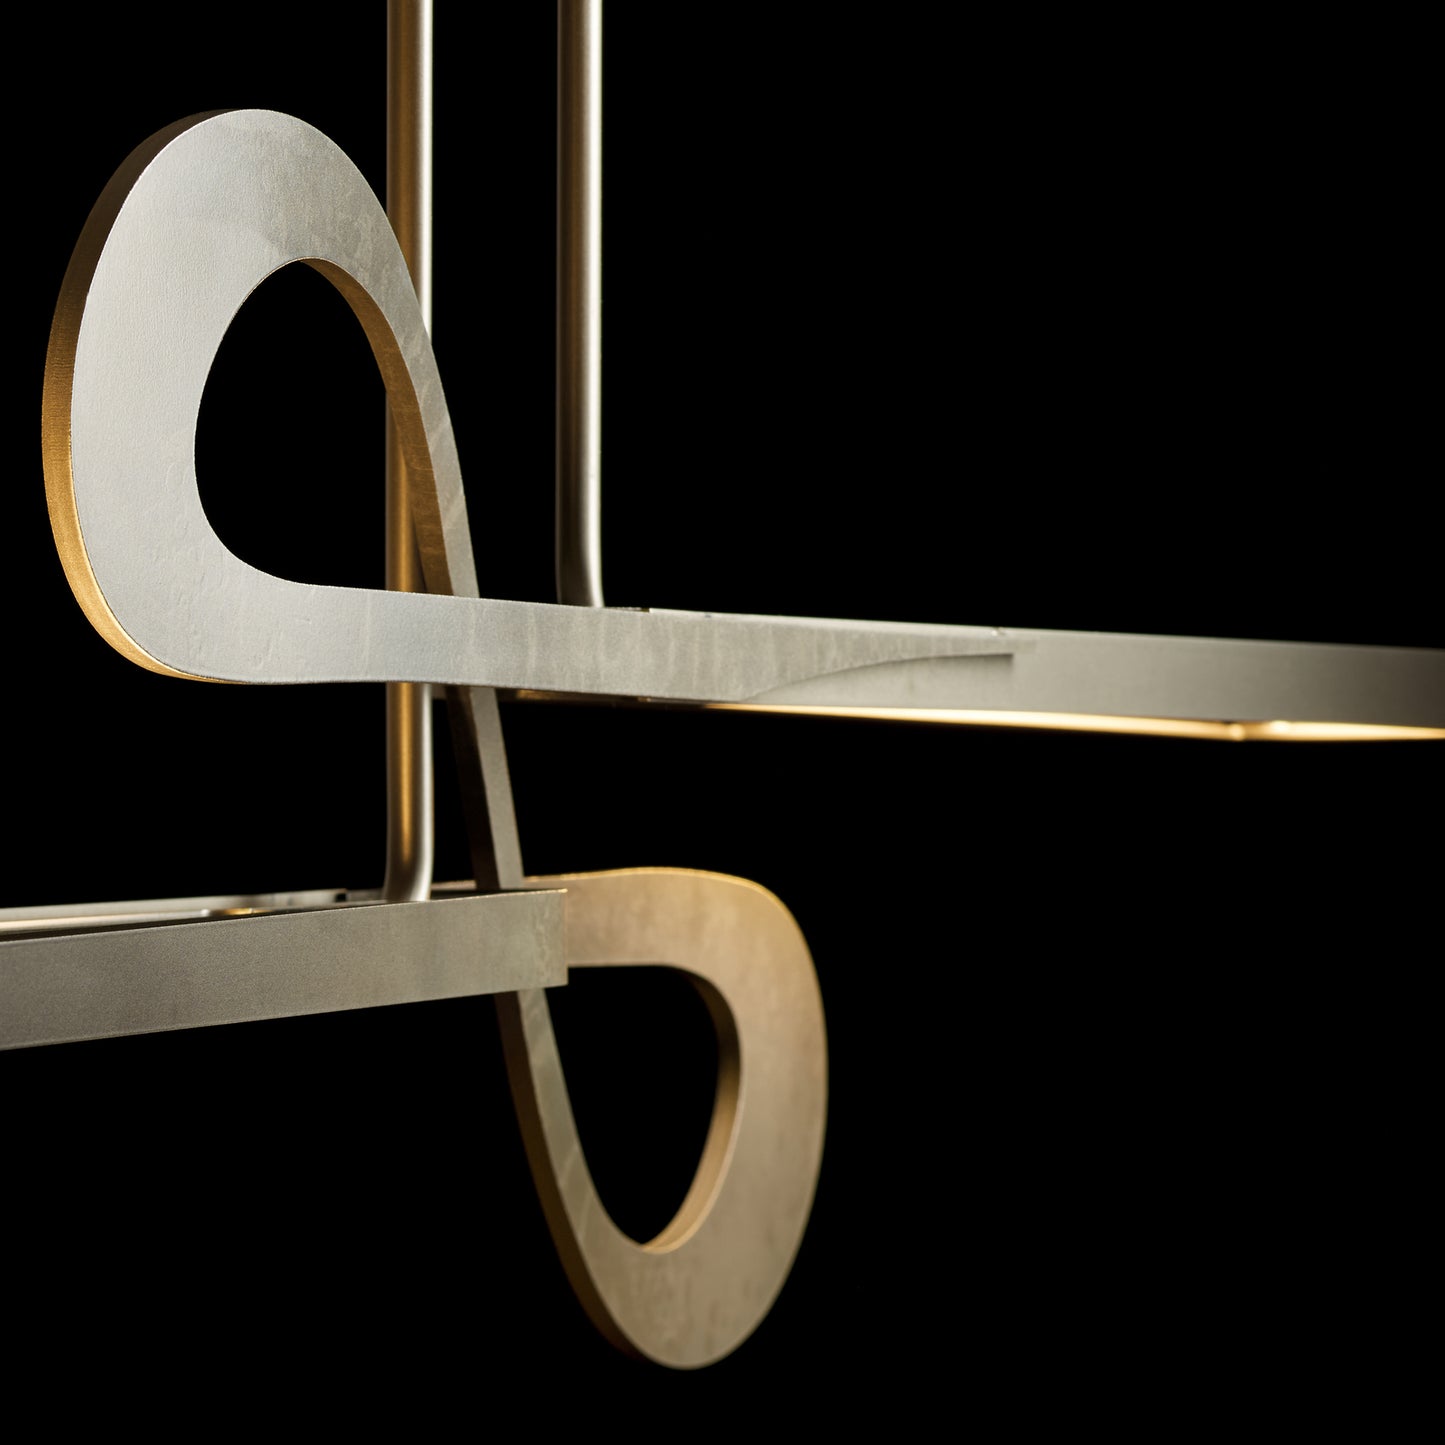 A Switchback Pendant by Hubbardton Forge in Vermont.